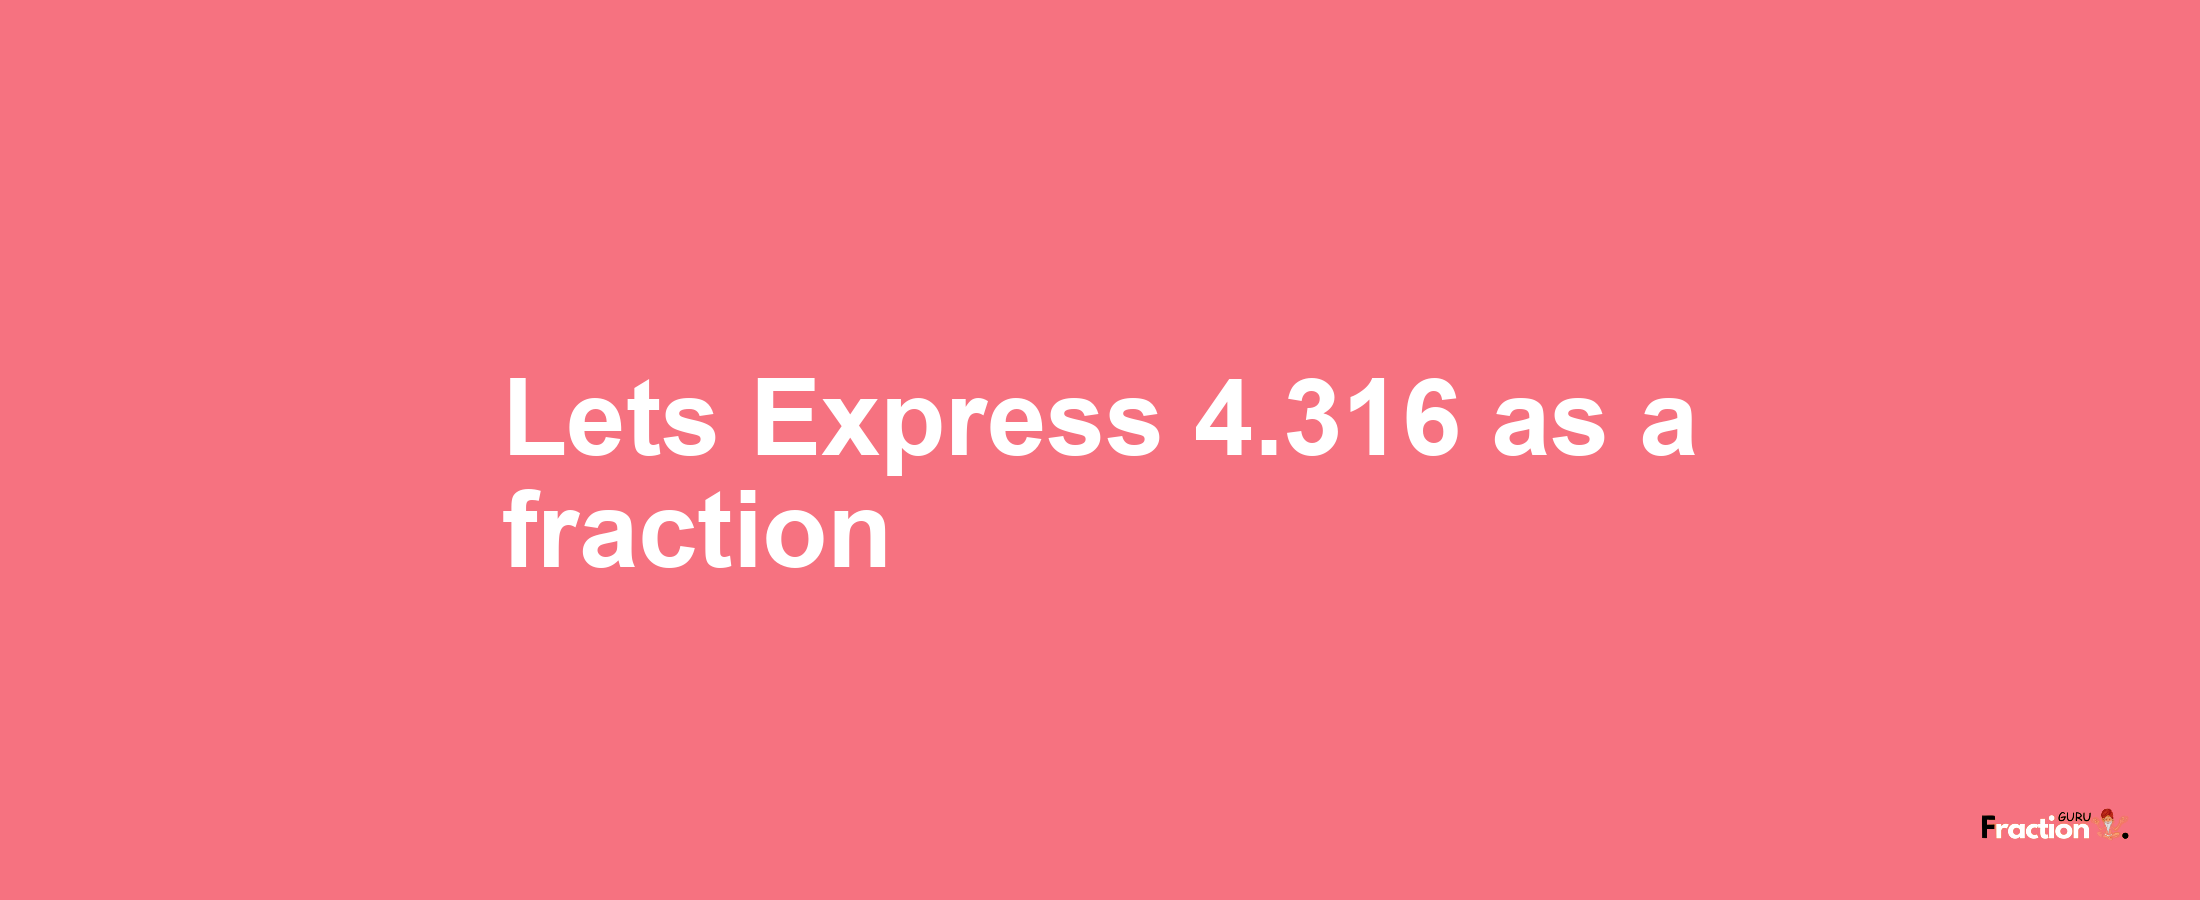 Lets Express 4.316 as afraction